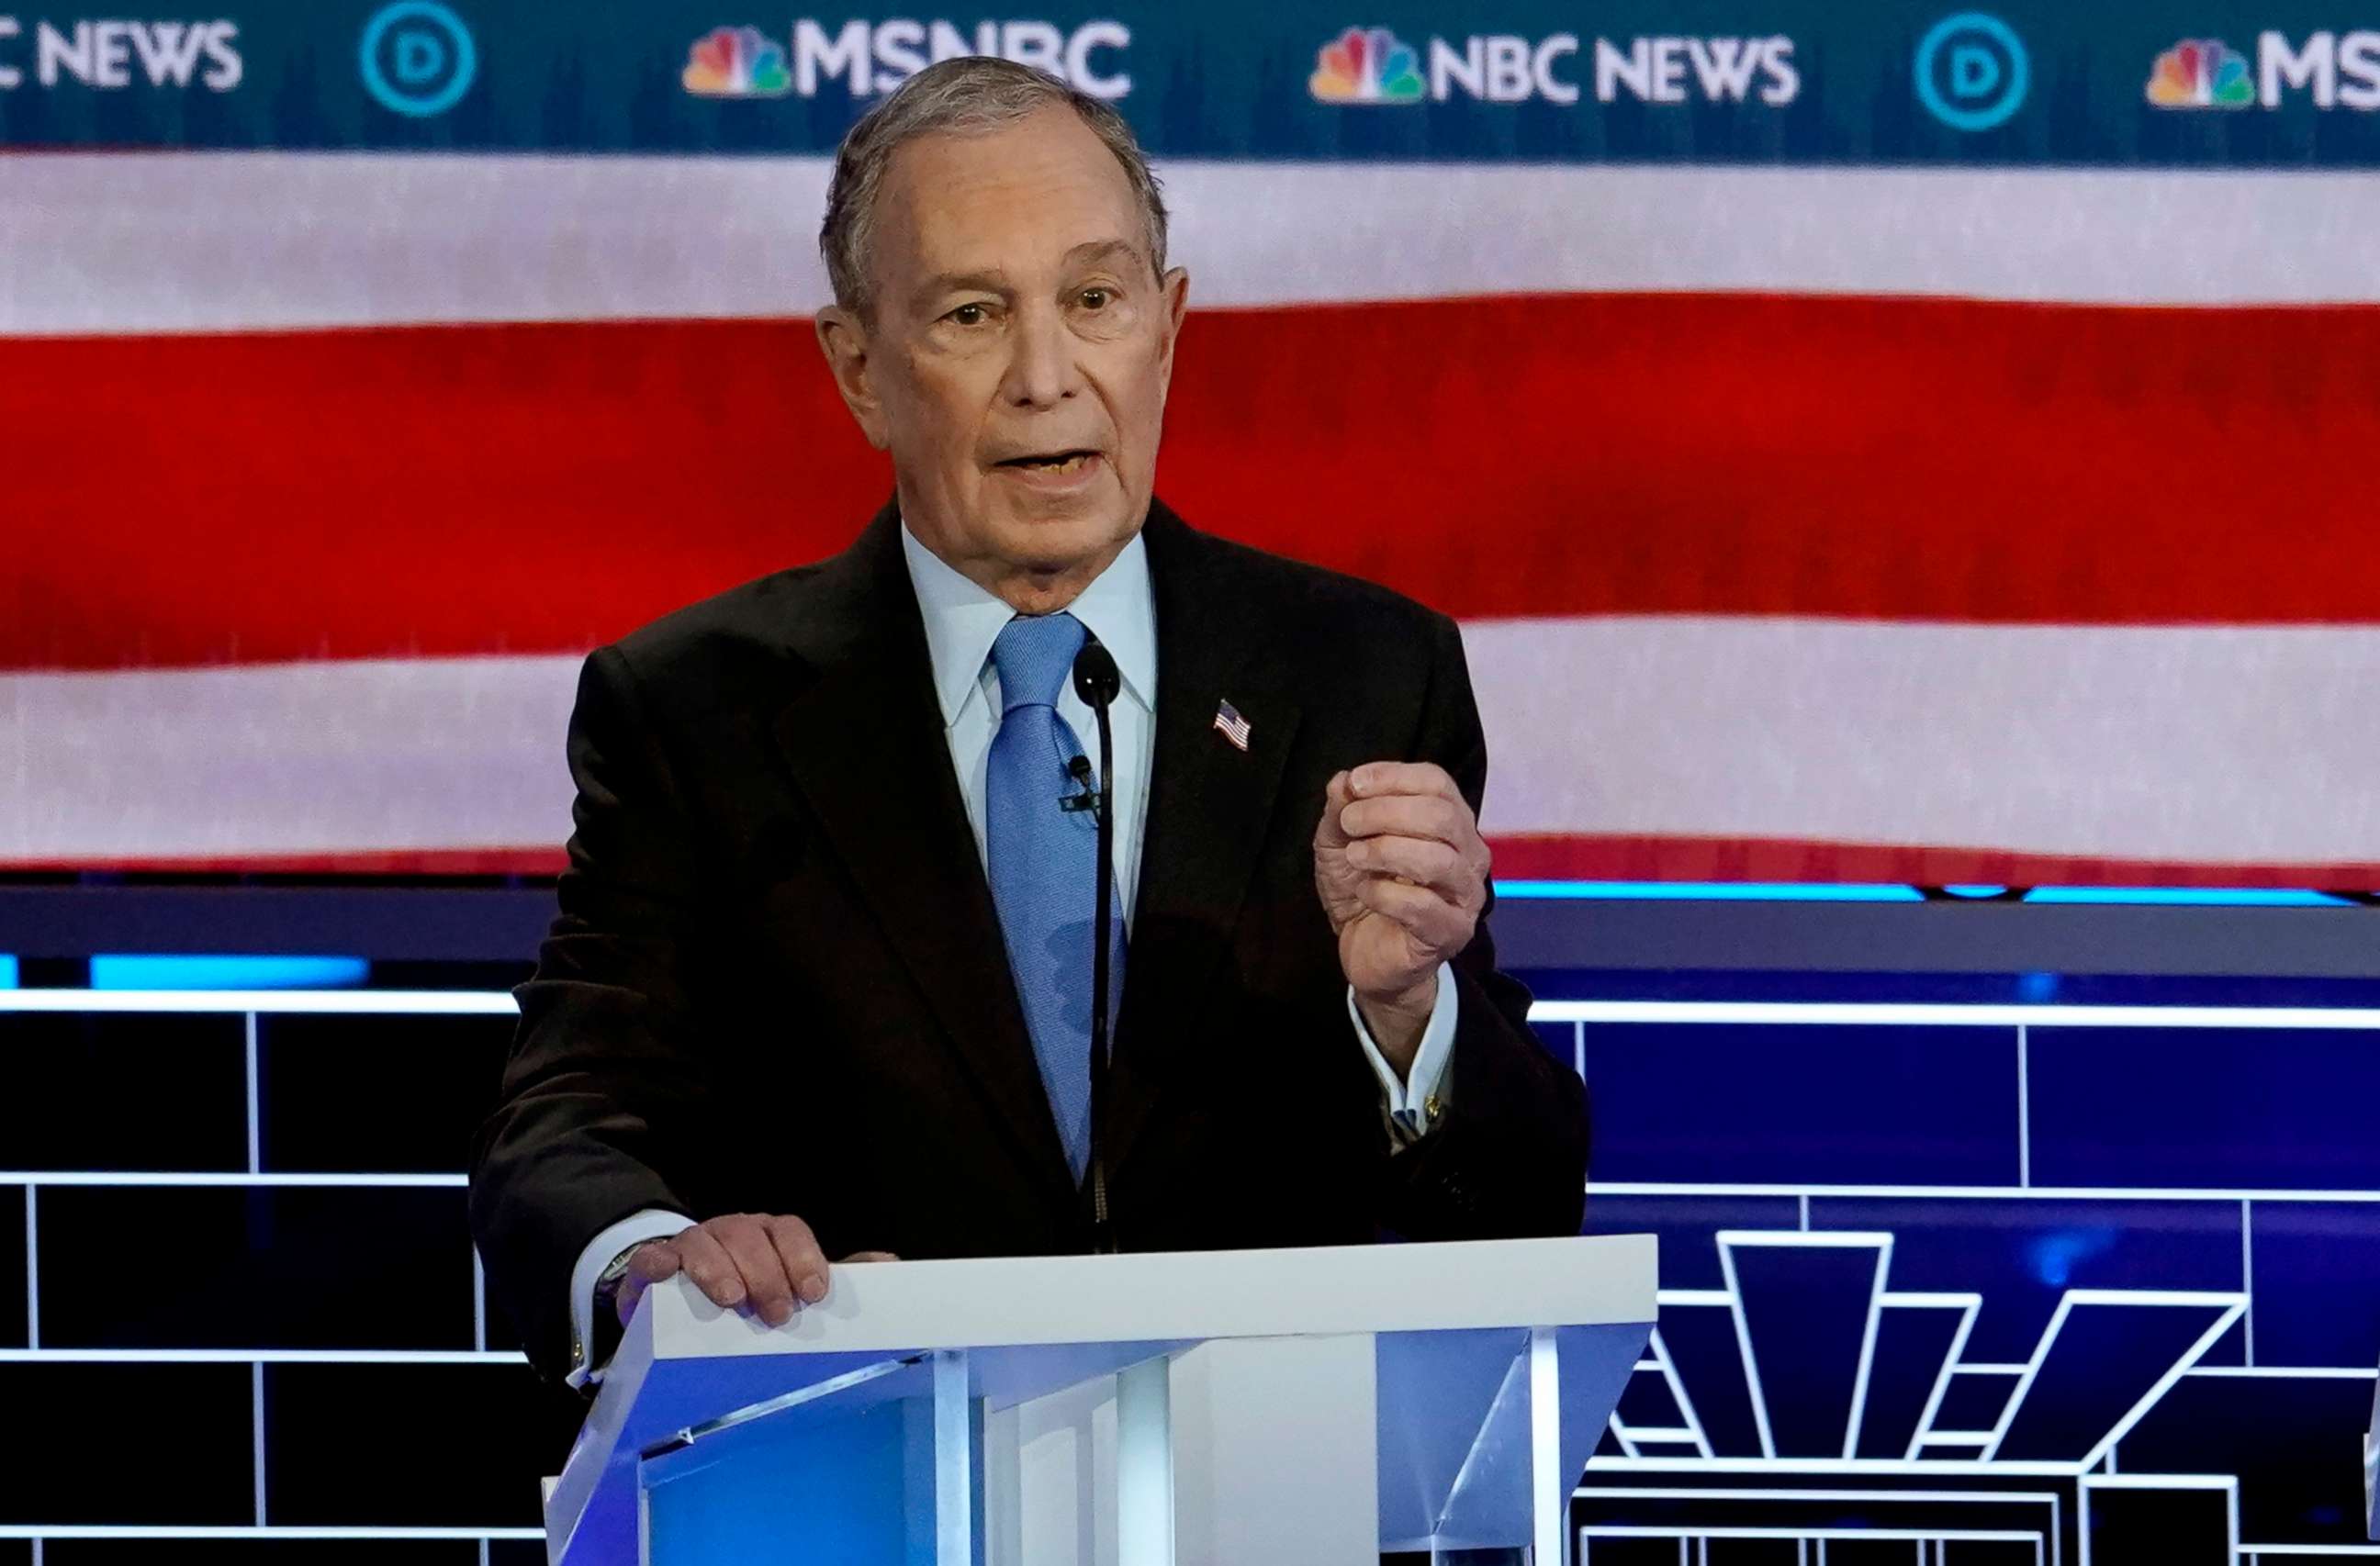 PHOTO: Former New York City Mayor Mike Bloomberg speaks at the ninth Democratic 2020 Presidential candidates debate at the Paris Theater in Las Vegas, Nevada, Feb. 19, 2020.